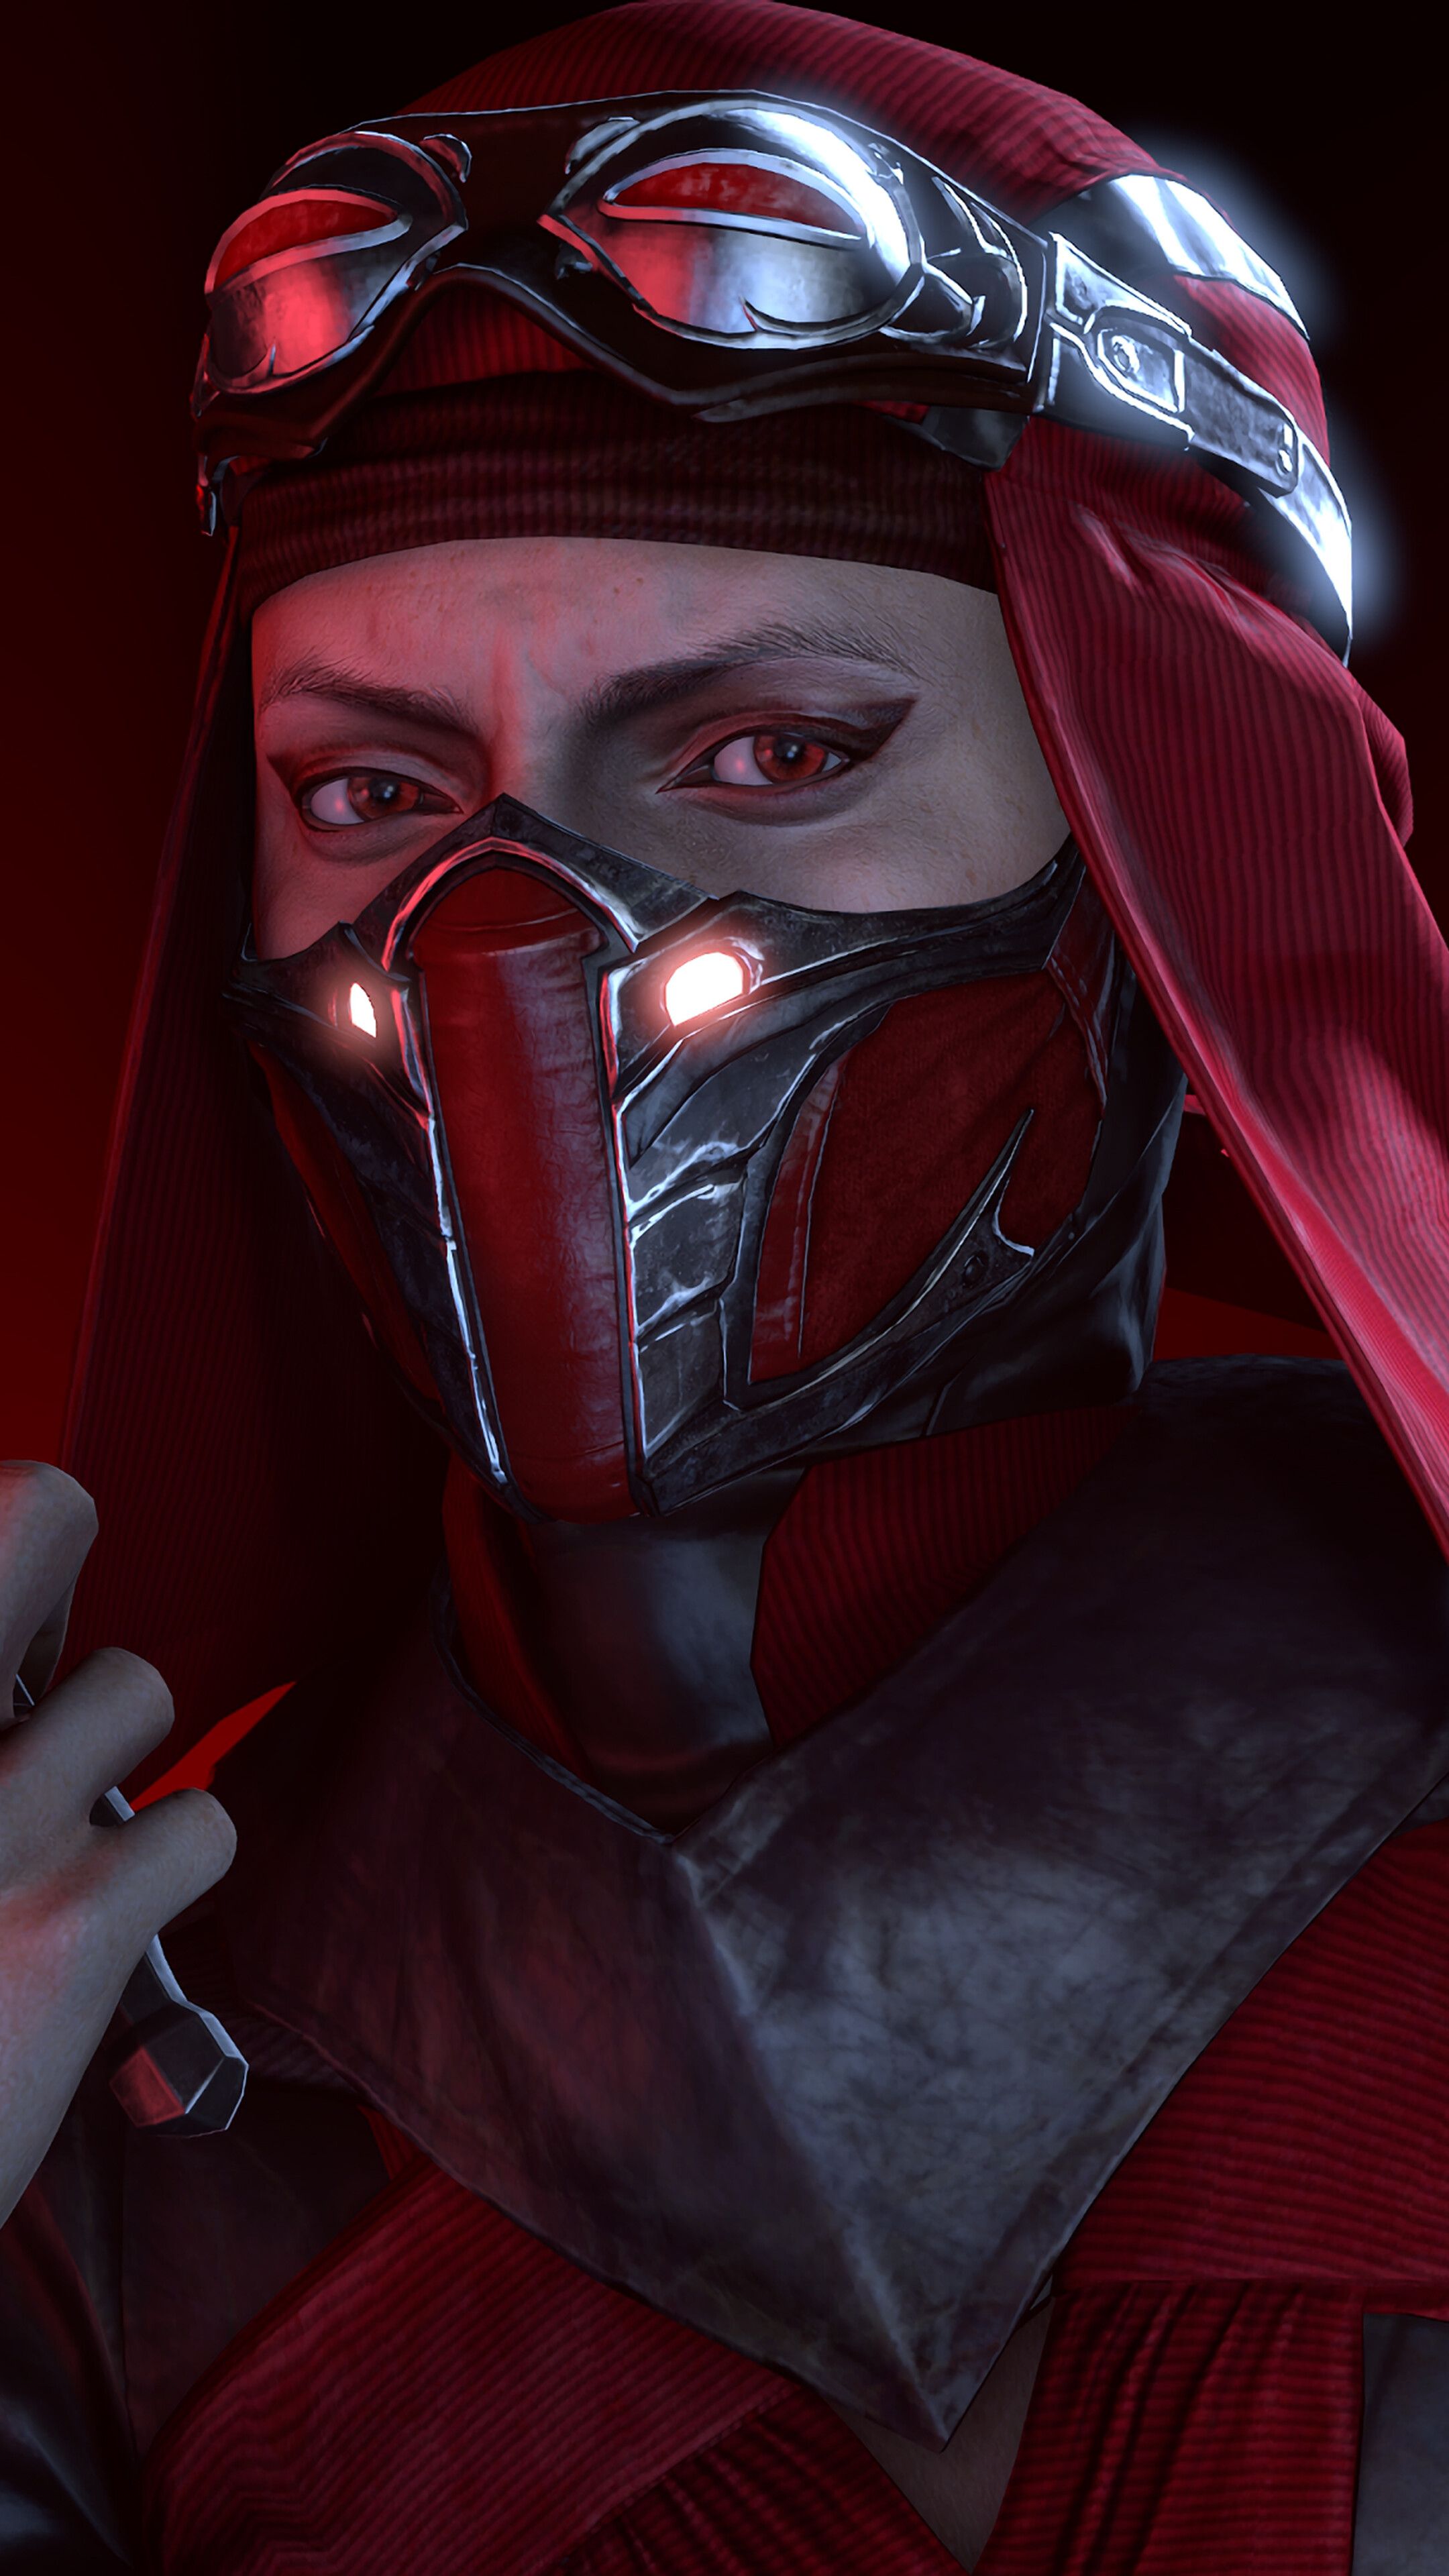 As requested, a Skarlet wallpaper from MK11!